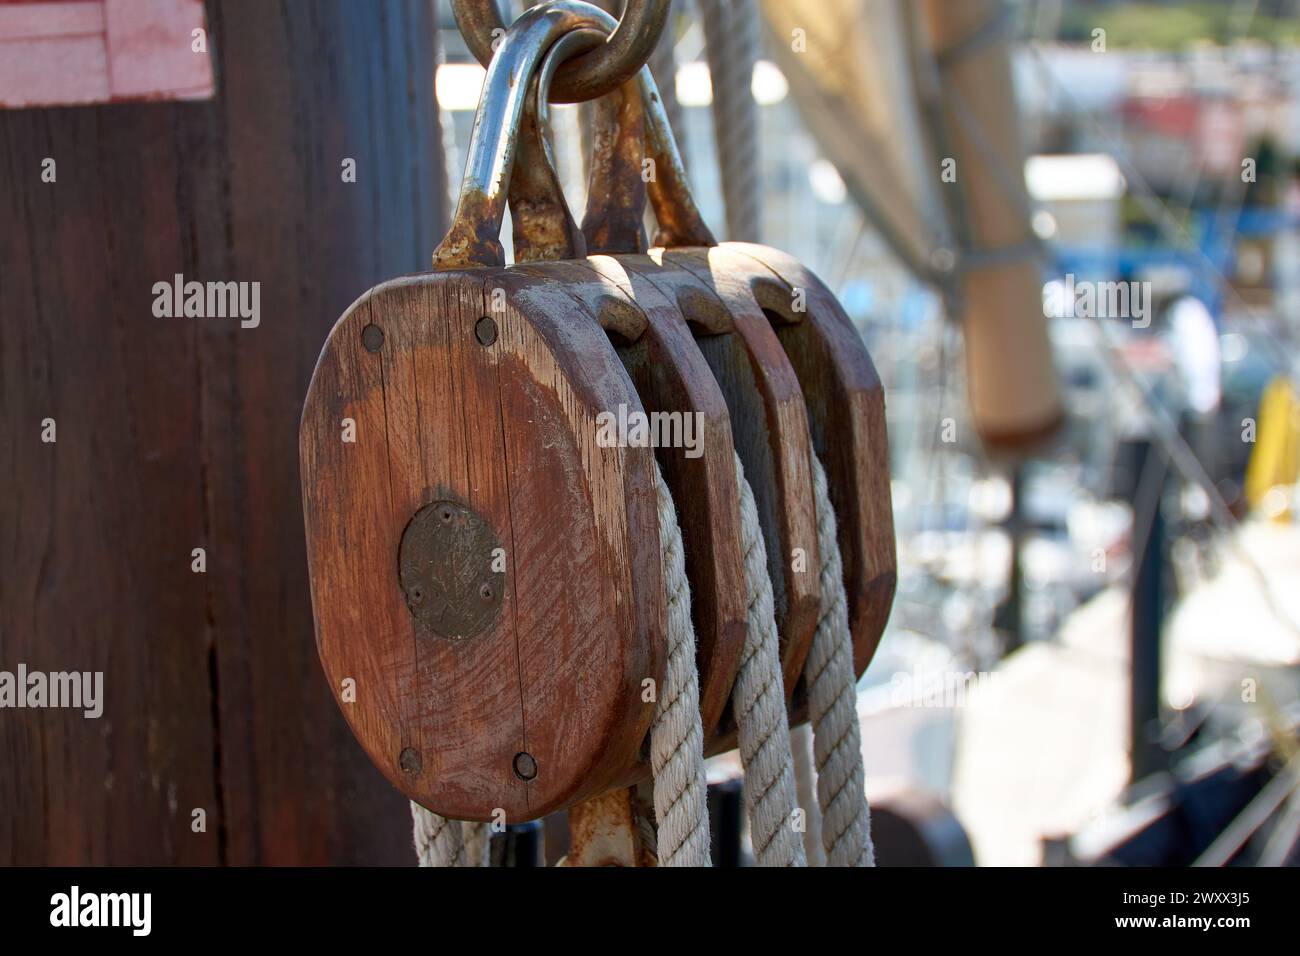 Pulley for sails and ropes made of wood on the replica of the Santa Maria caravel, with the sail and other ships in the harbor, soft and out of focus Stock Photo